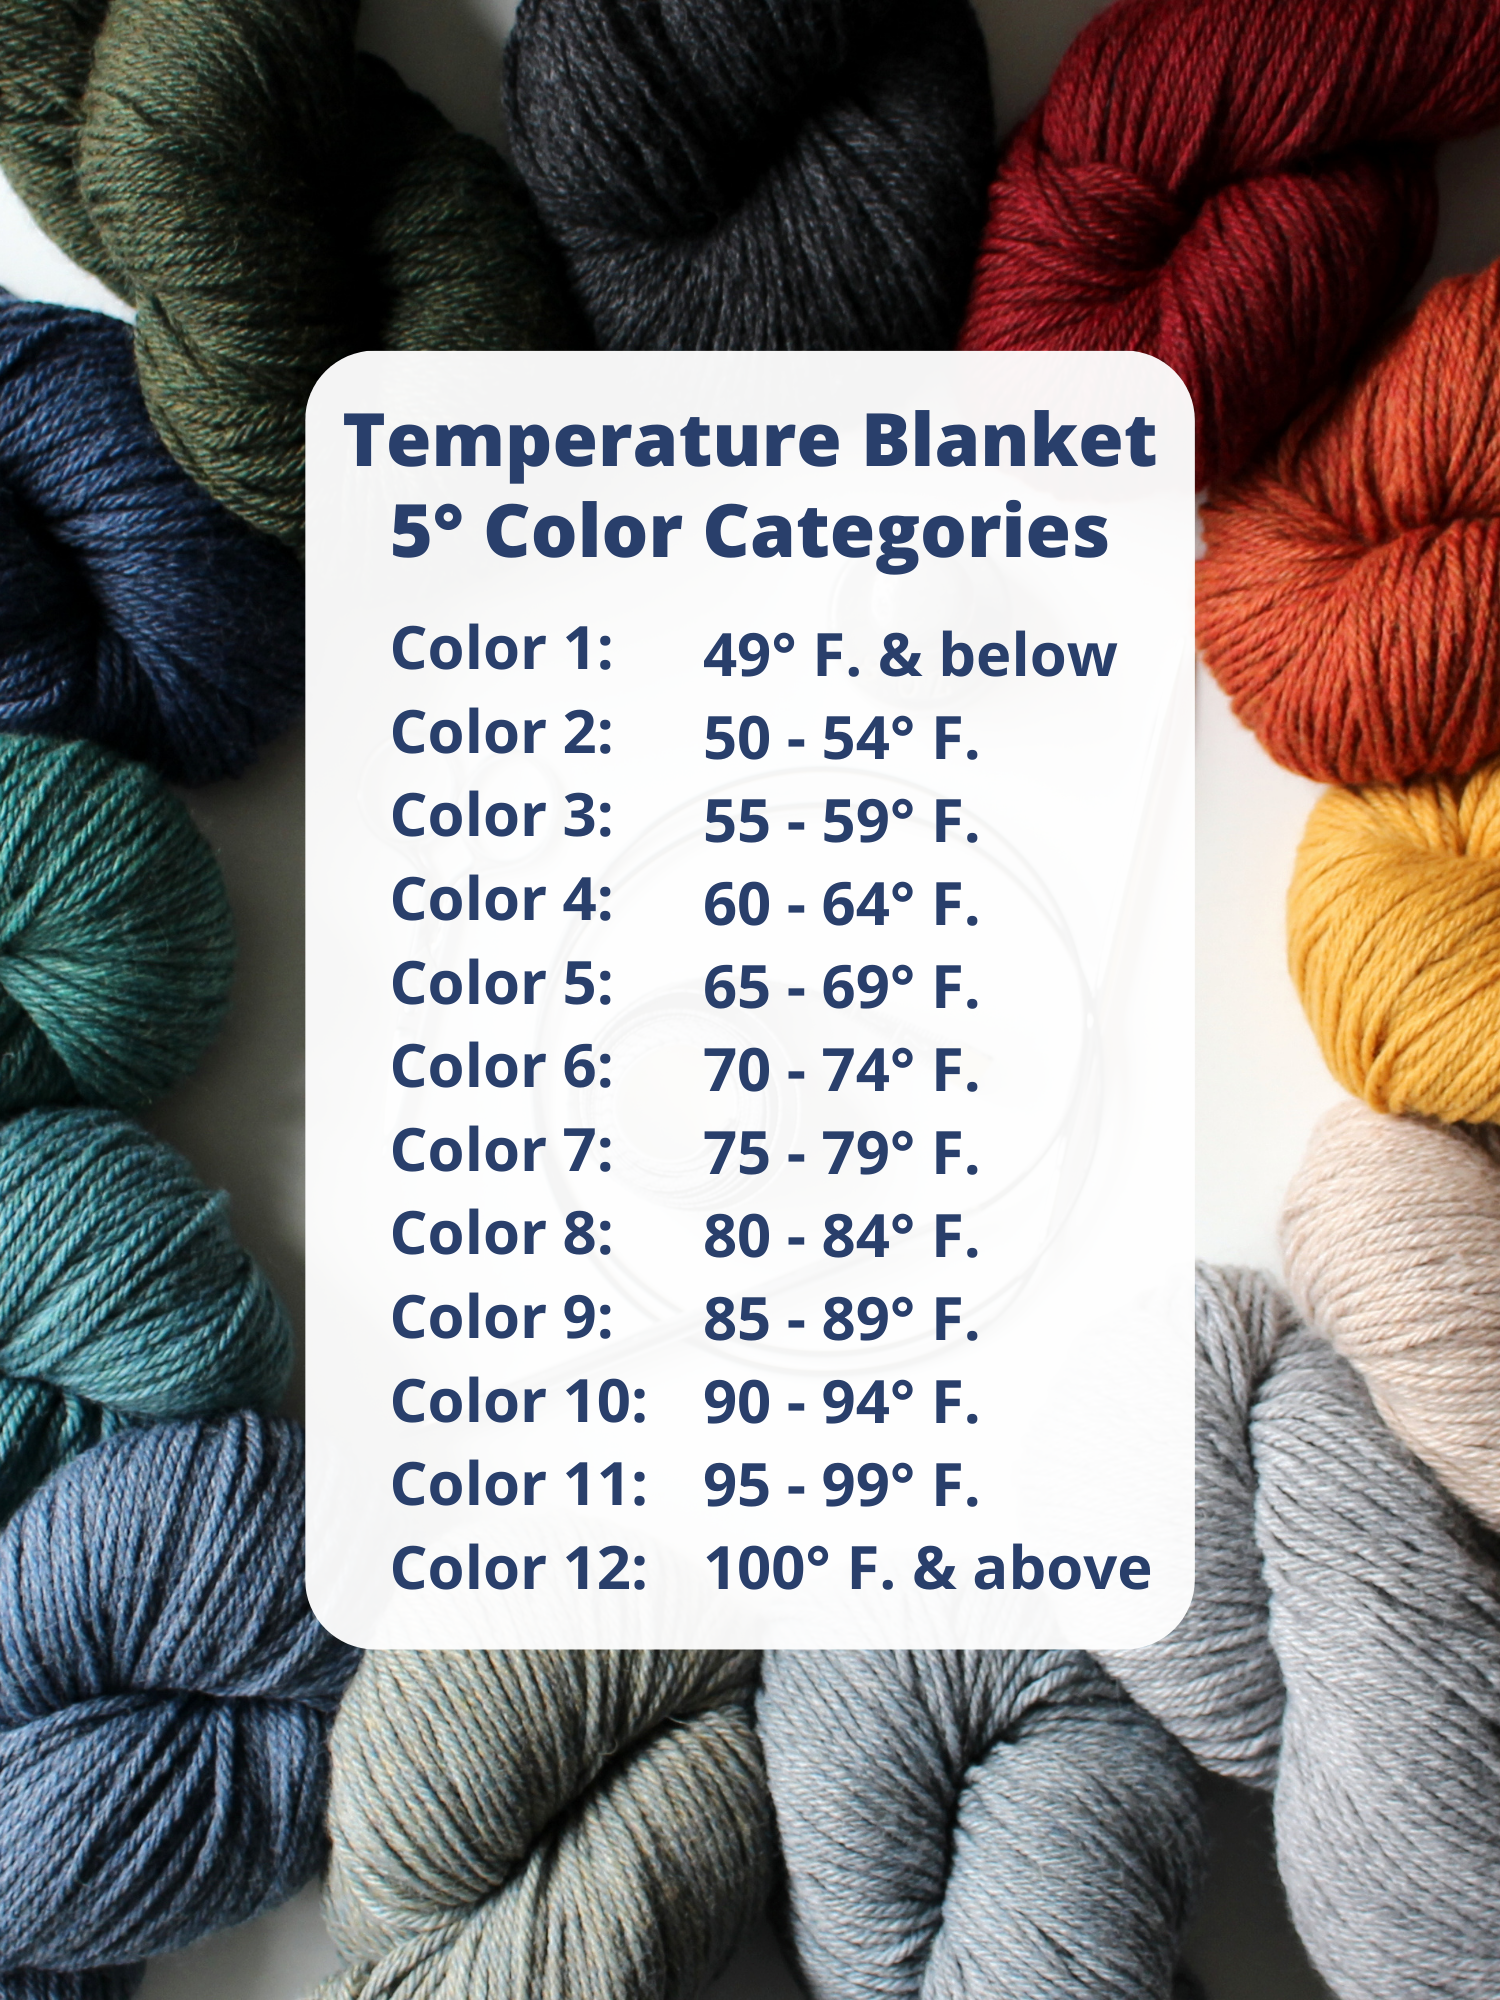 A Journal in Yarn: How to Plan a Temperature Blanket Knitting